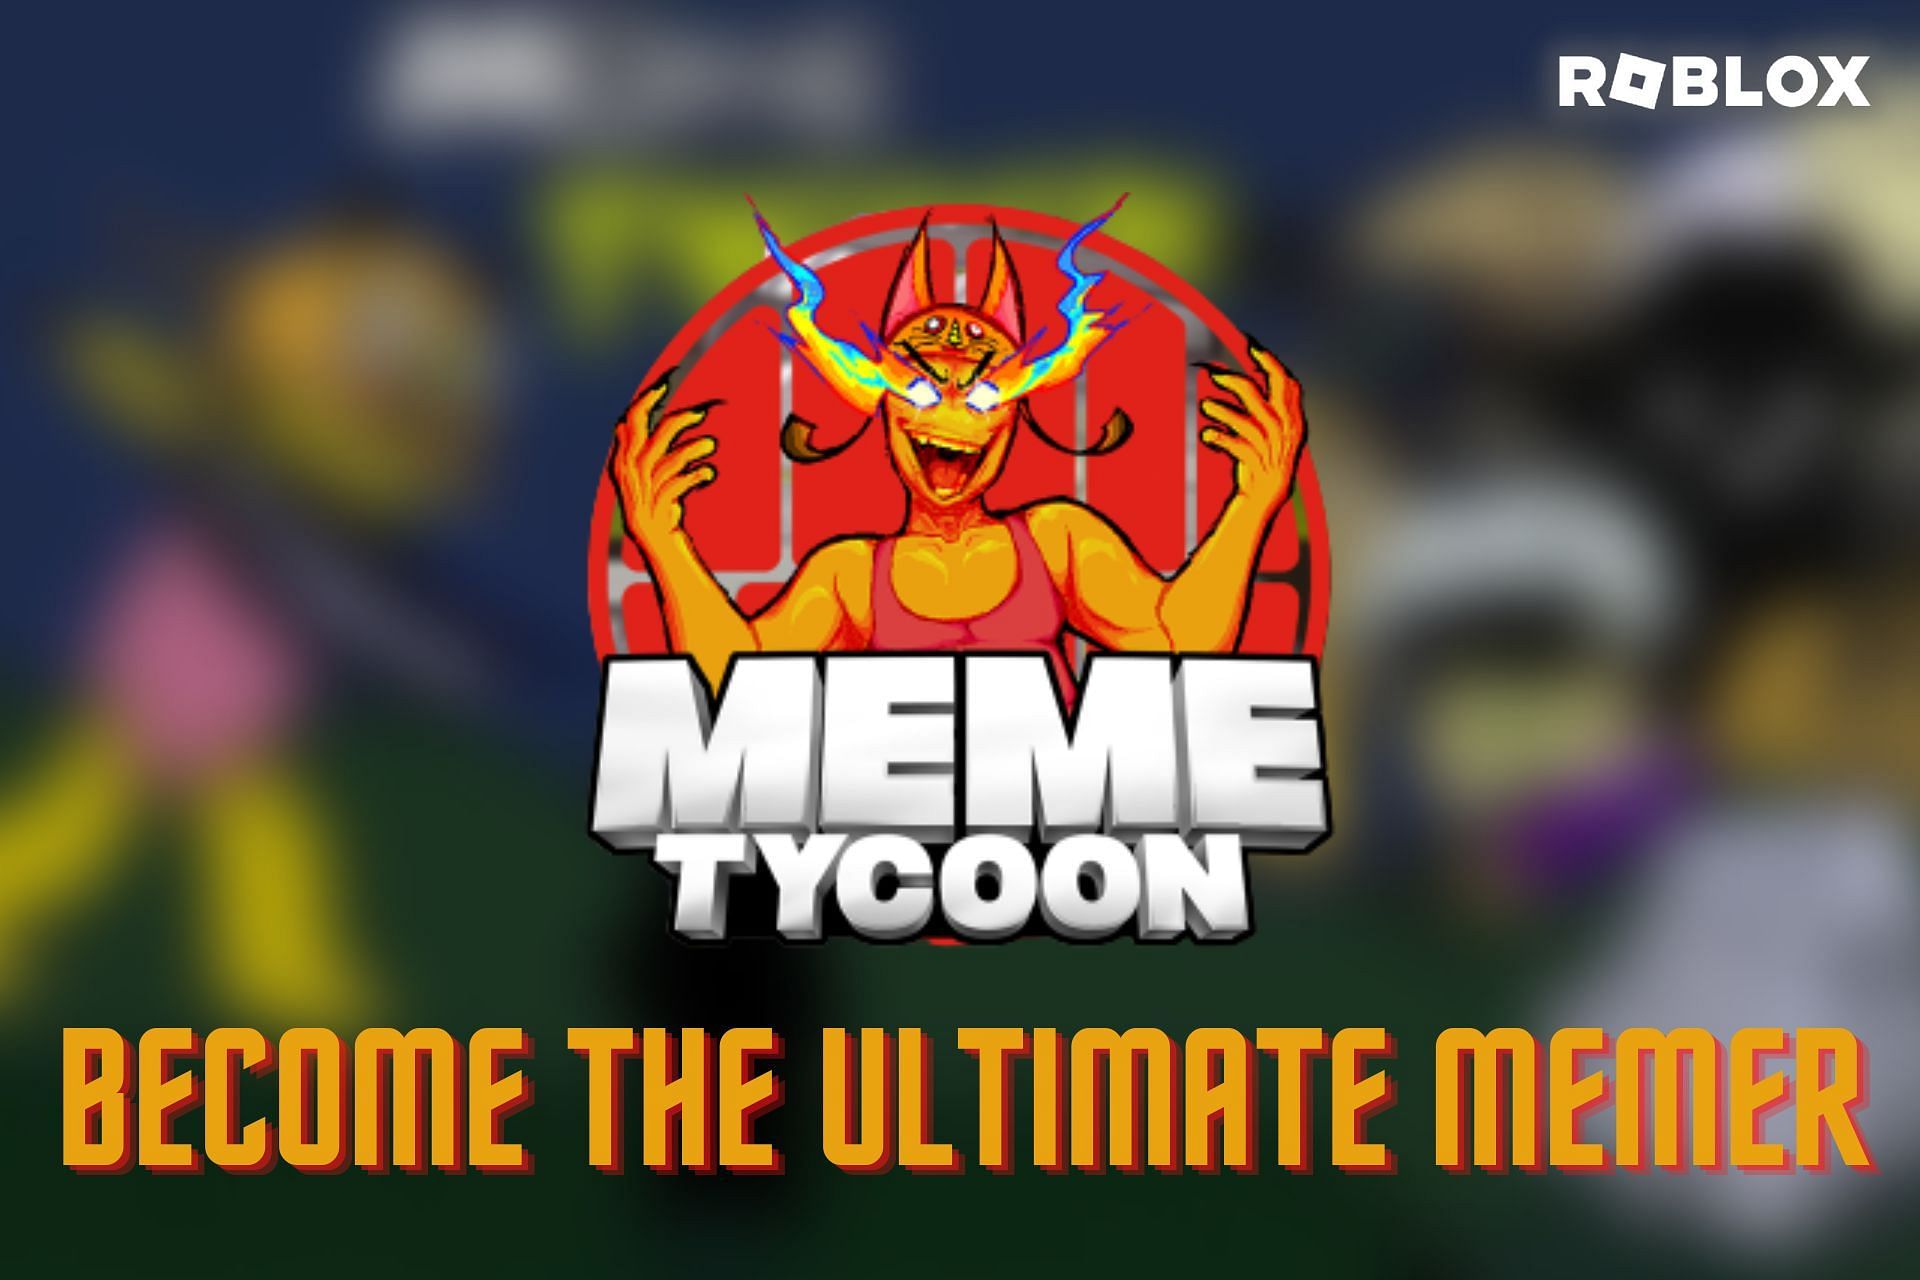 making memes in your basement at 3 AM tycoon (Roblox) 